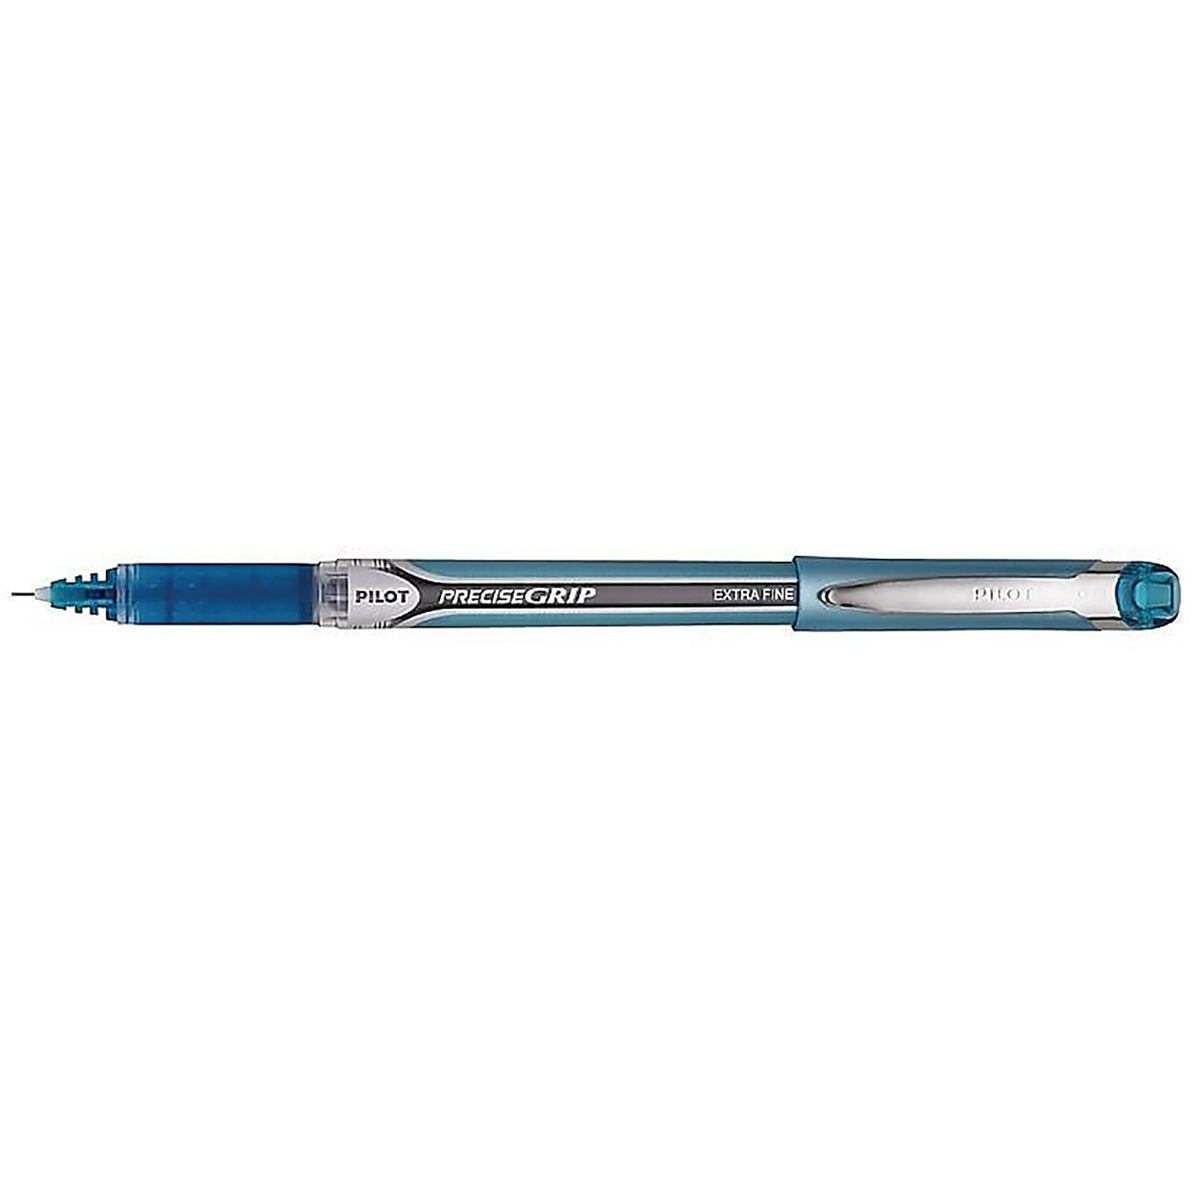 Pilot Precise Grip, Needle Point, Rubber Grip, Turquoise Liquid Ink Rollerball Pen Extra Fine  Pilot Rollerball Pens